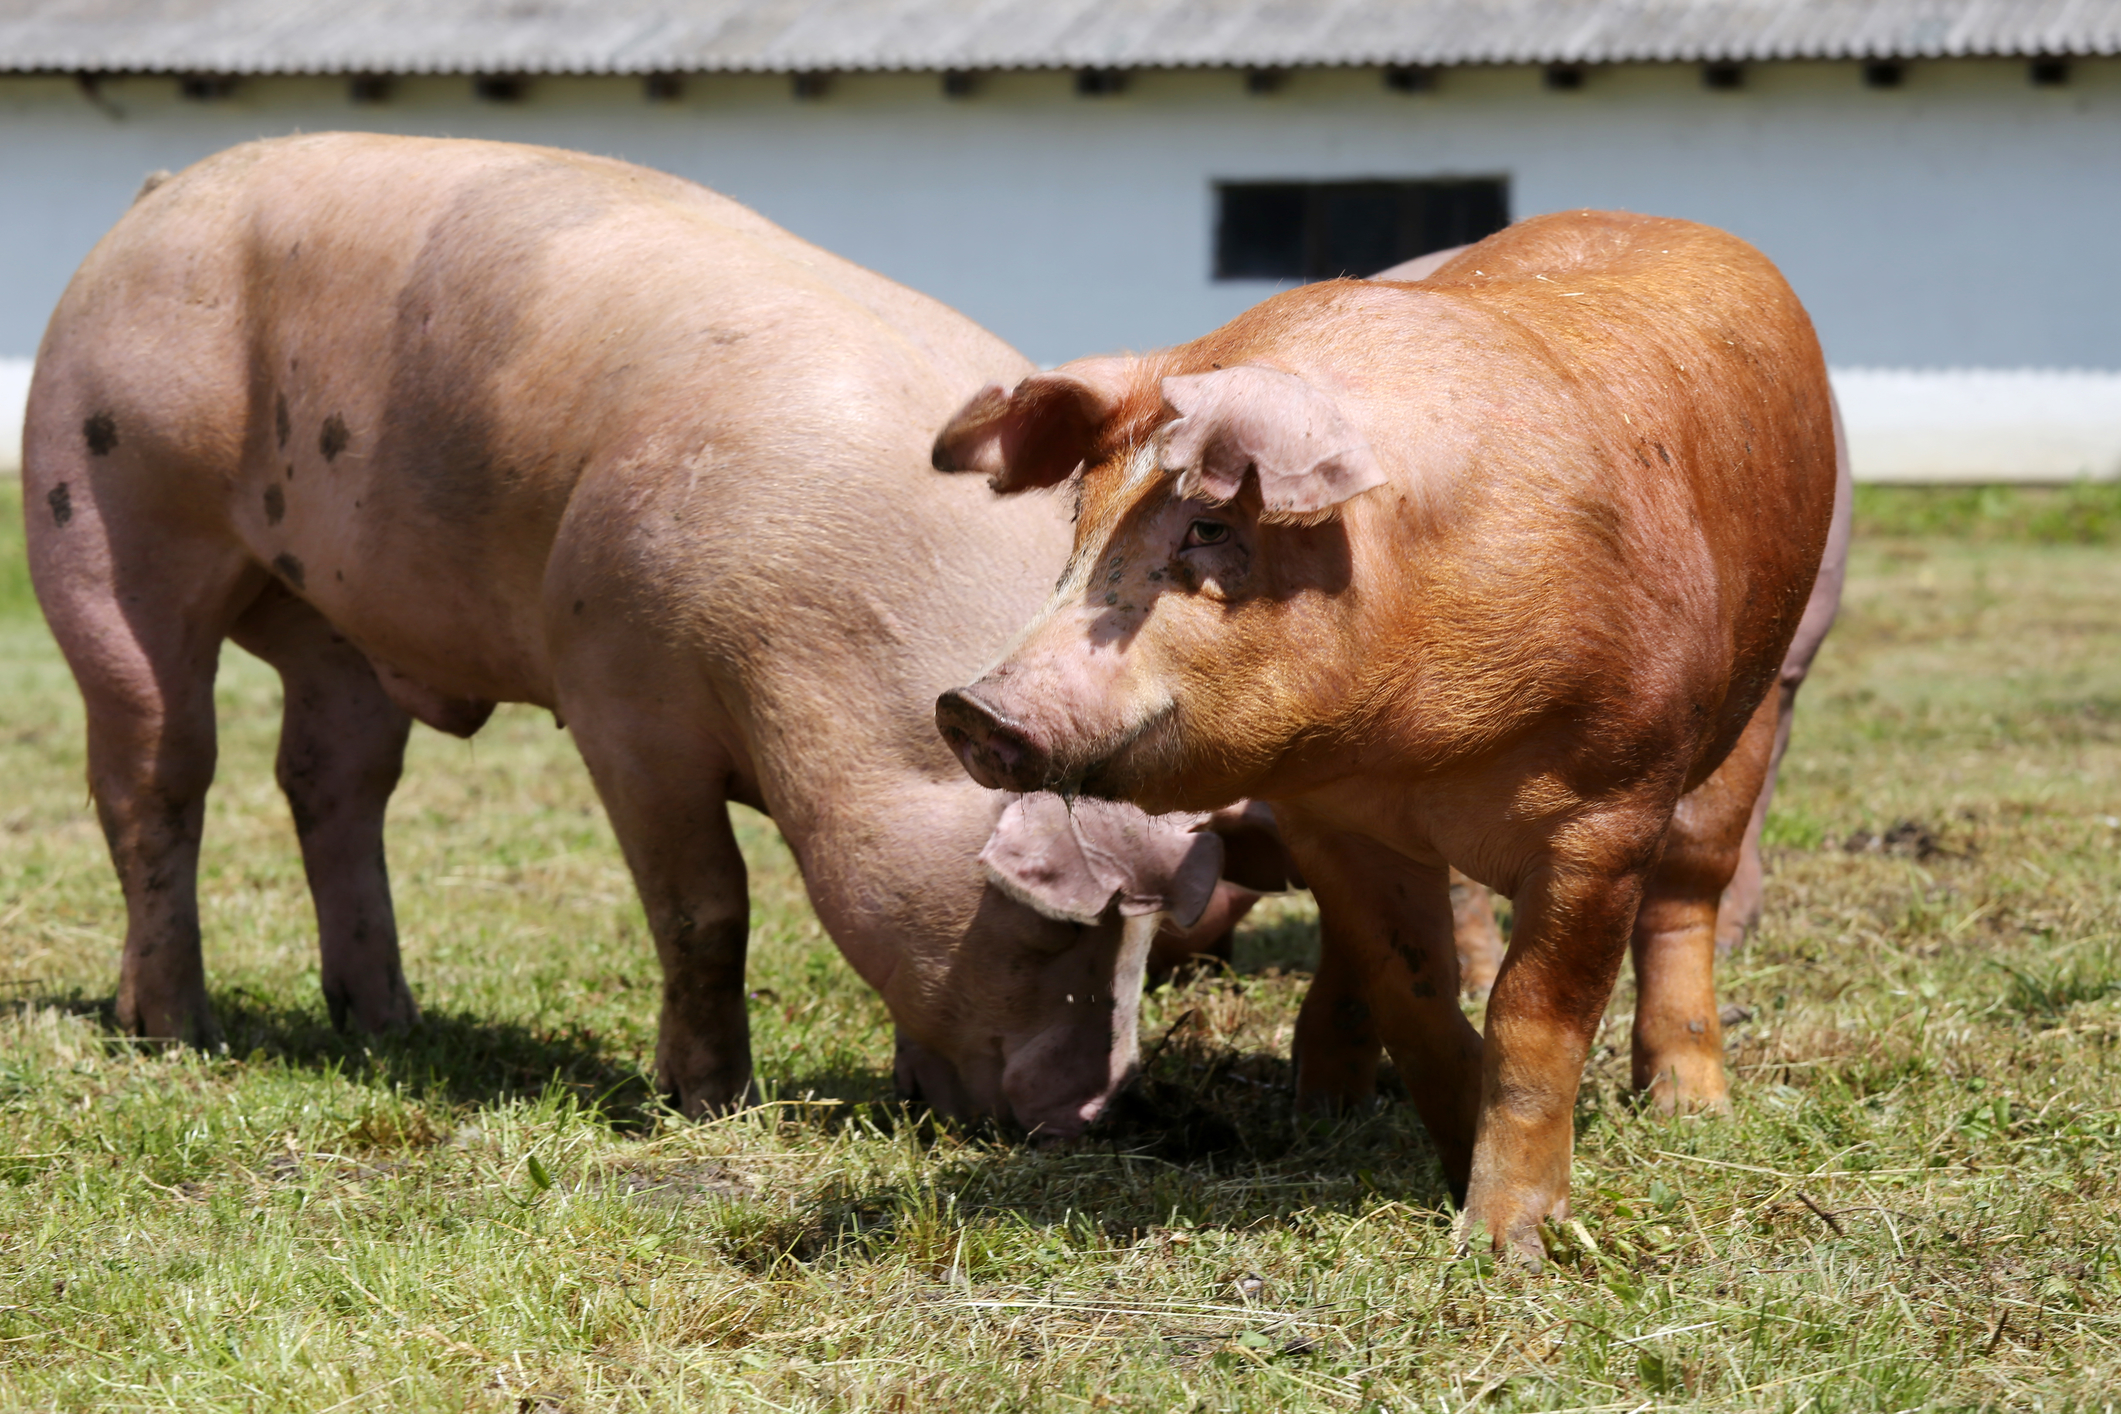 5 Ways Pigs Are Valuable Beyond Just Meat